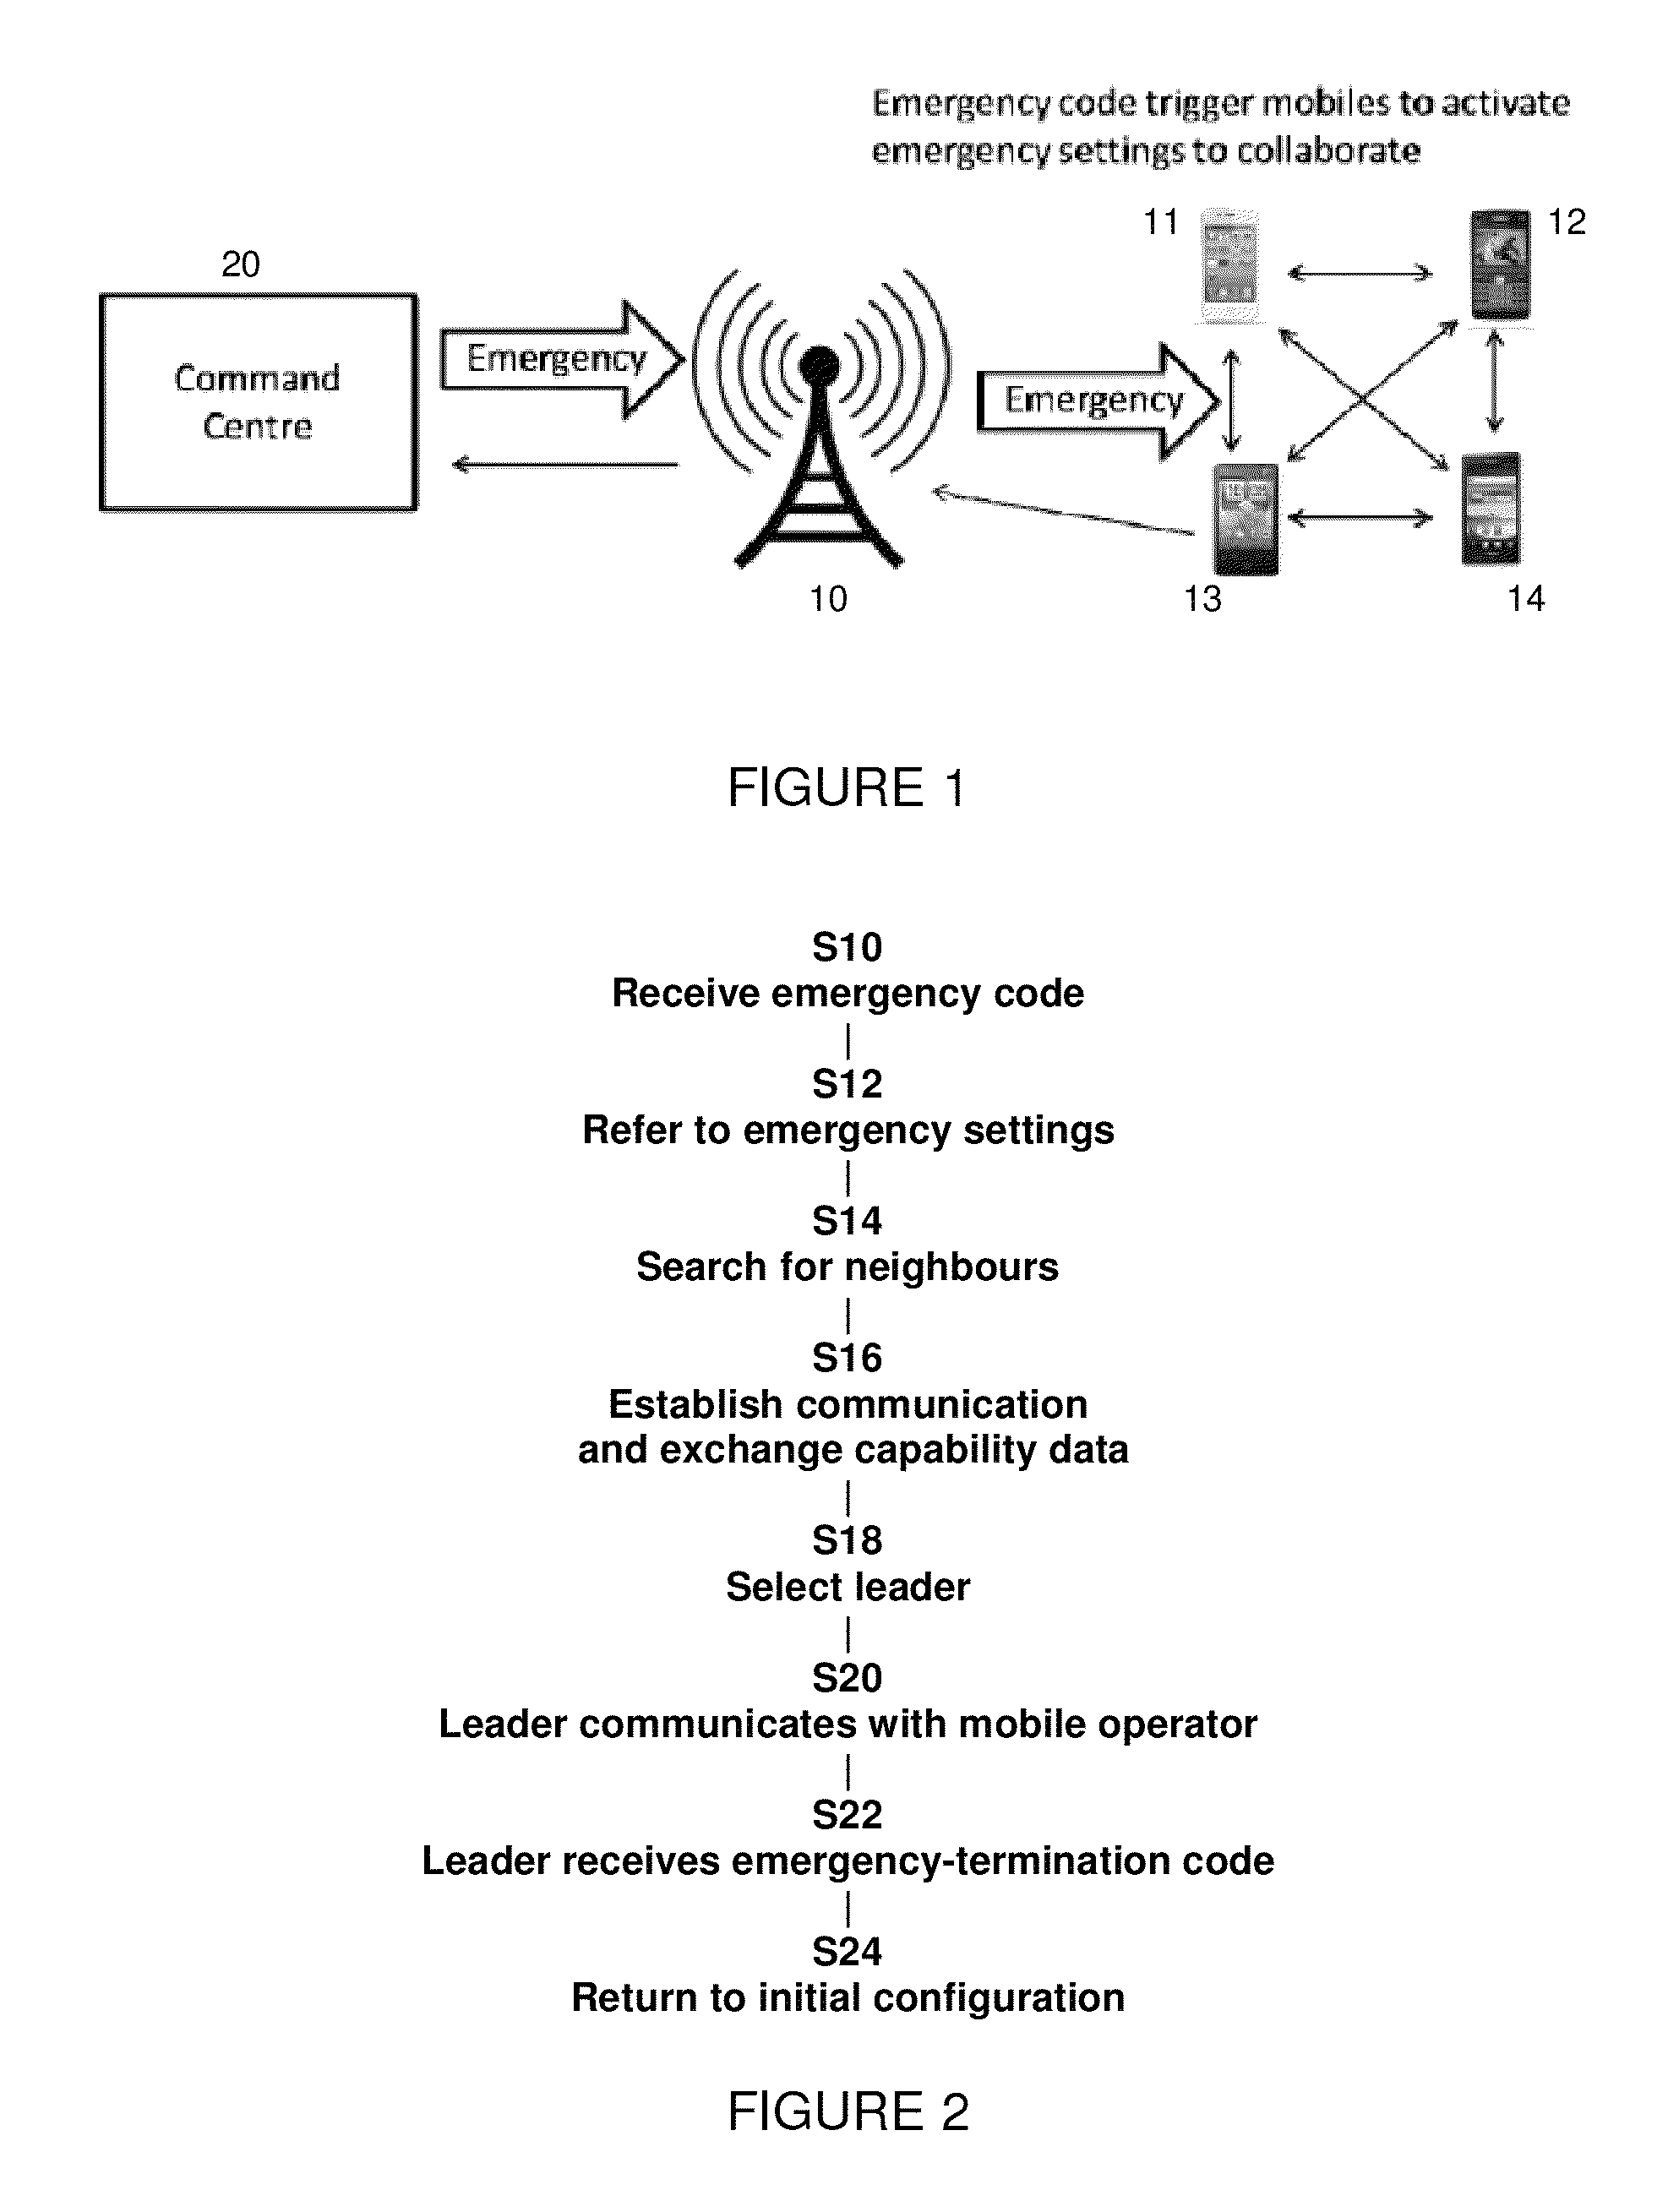 Automatic ad-hoc network of mobile devices